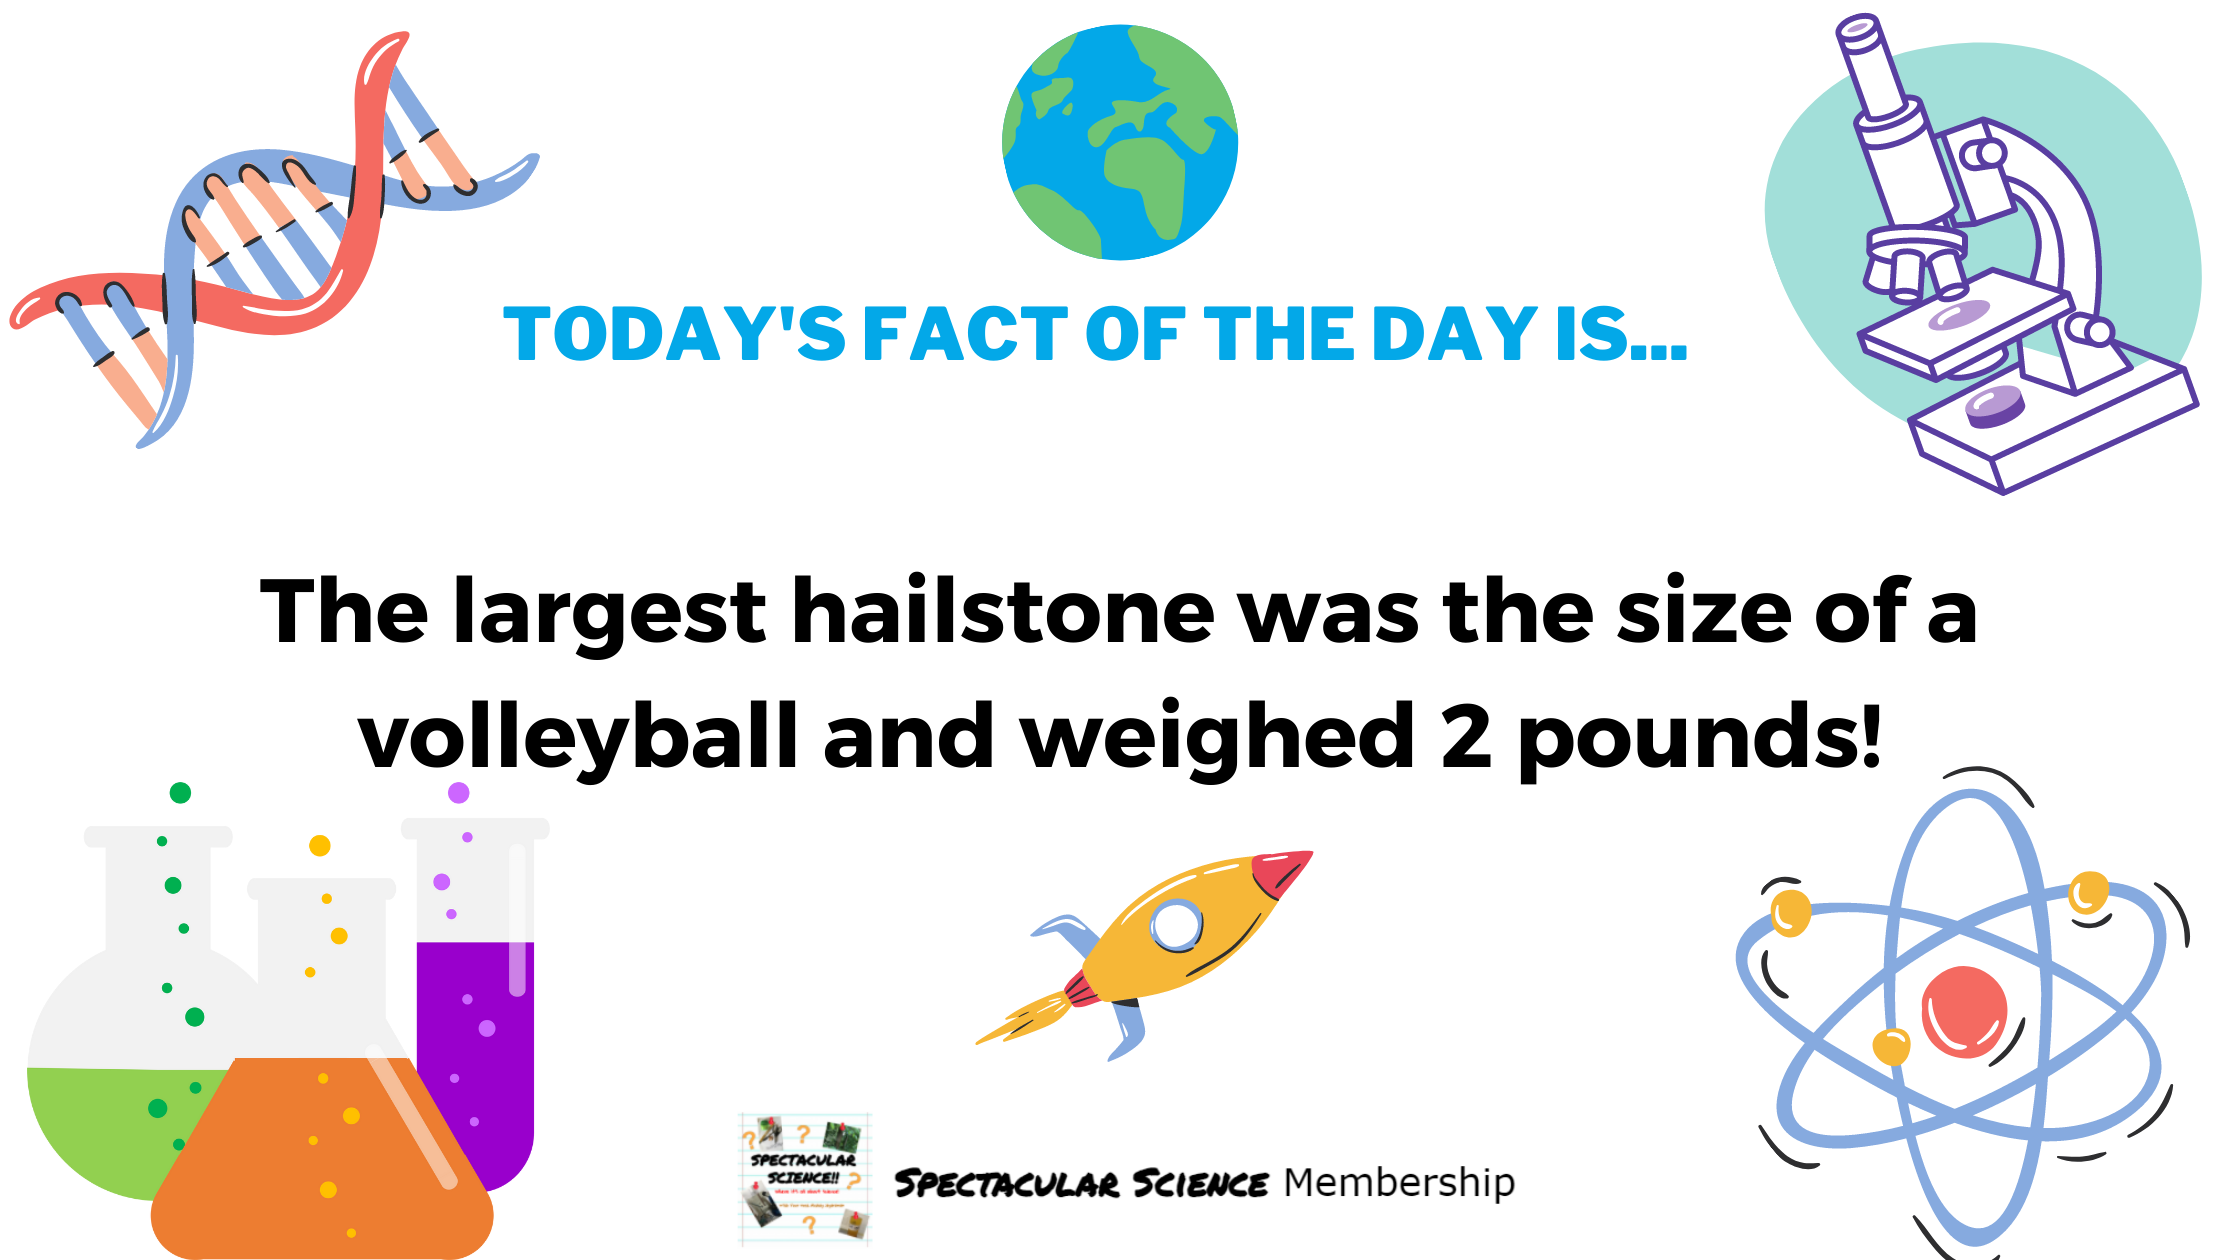 Fact of the Day Image Nov. 12th